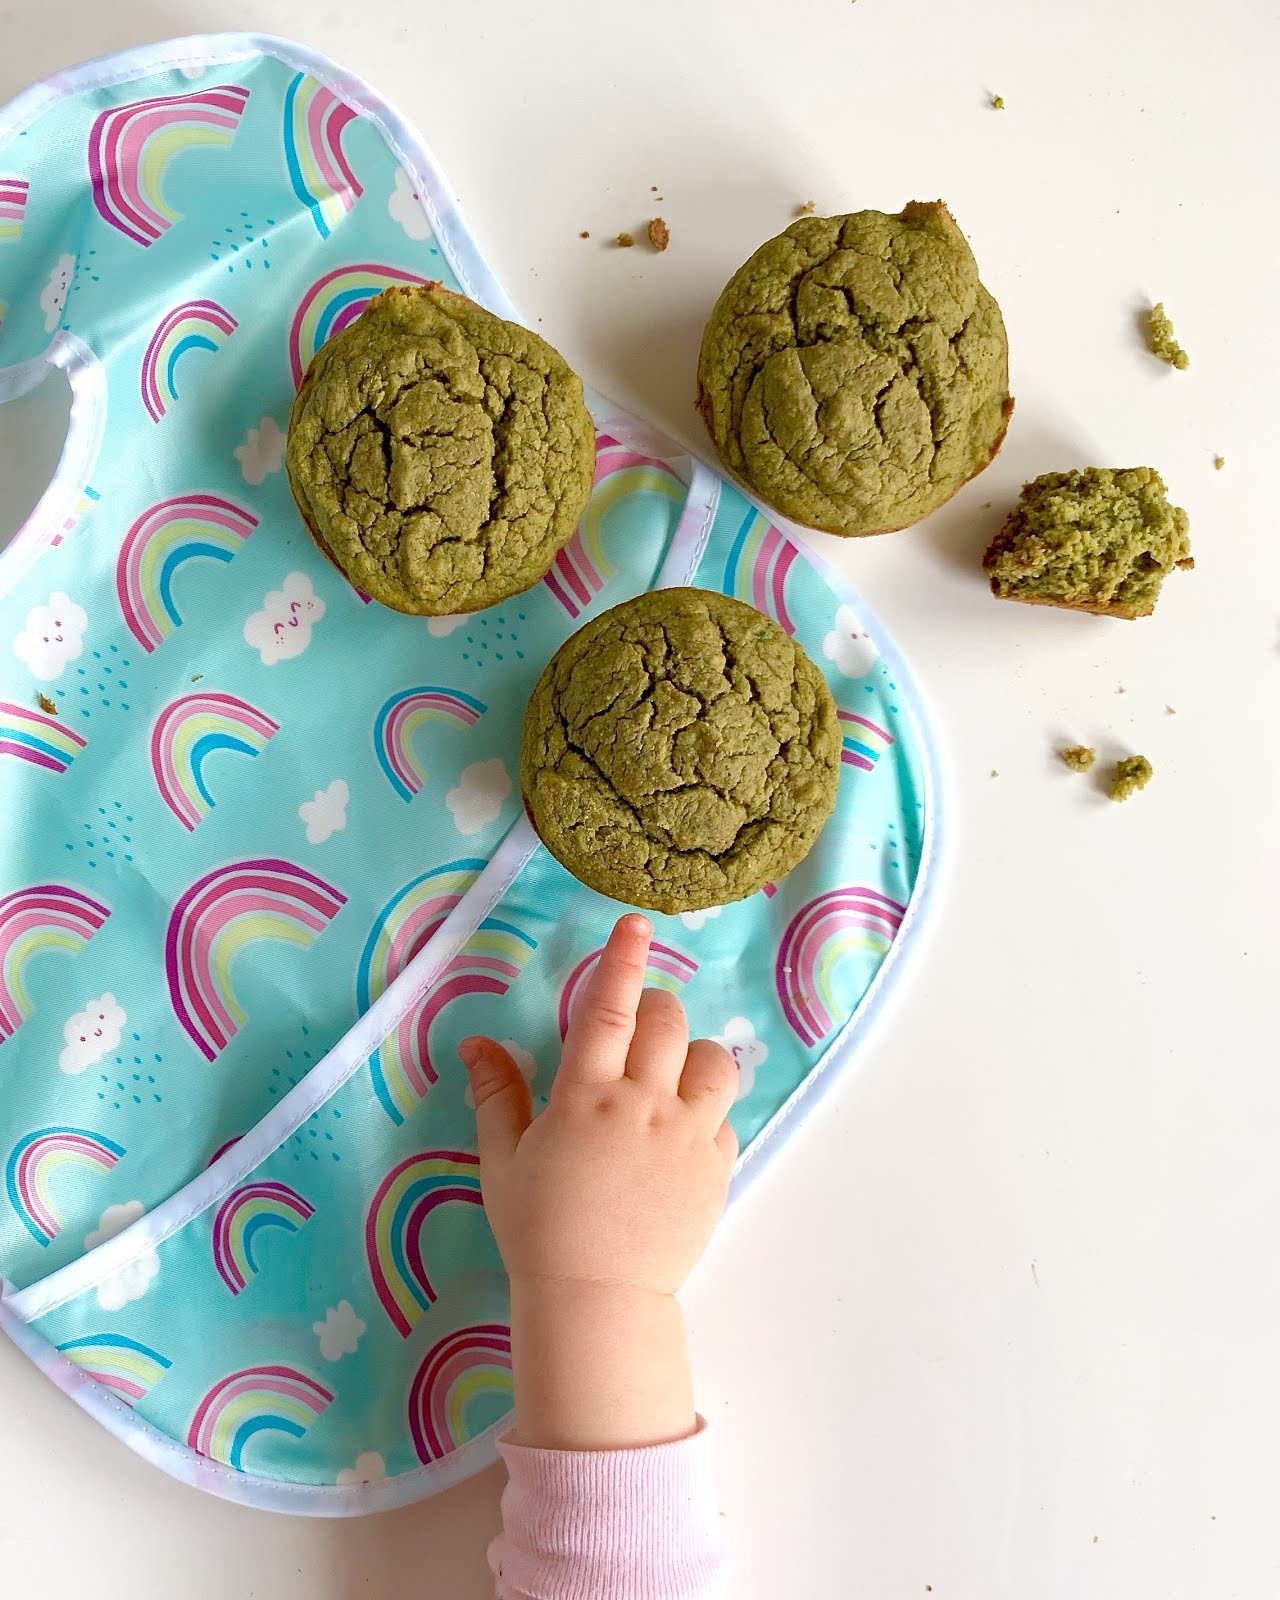 Healthy Fruit Veggie Muffins For Babies Toddlers Kids No Refined Sugar Salt Free Gluten Free Kale Broccoli Zucchini Carrots More The Lindsay Ann